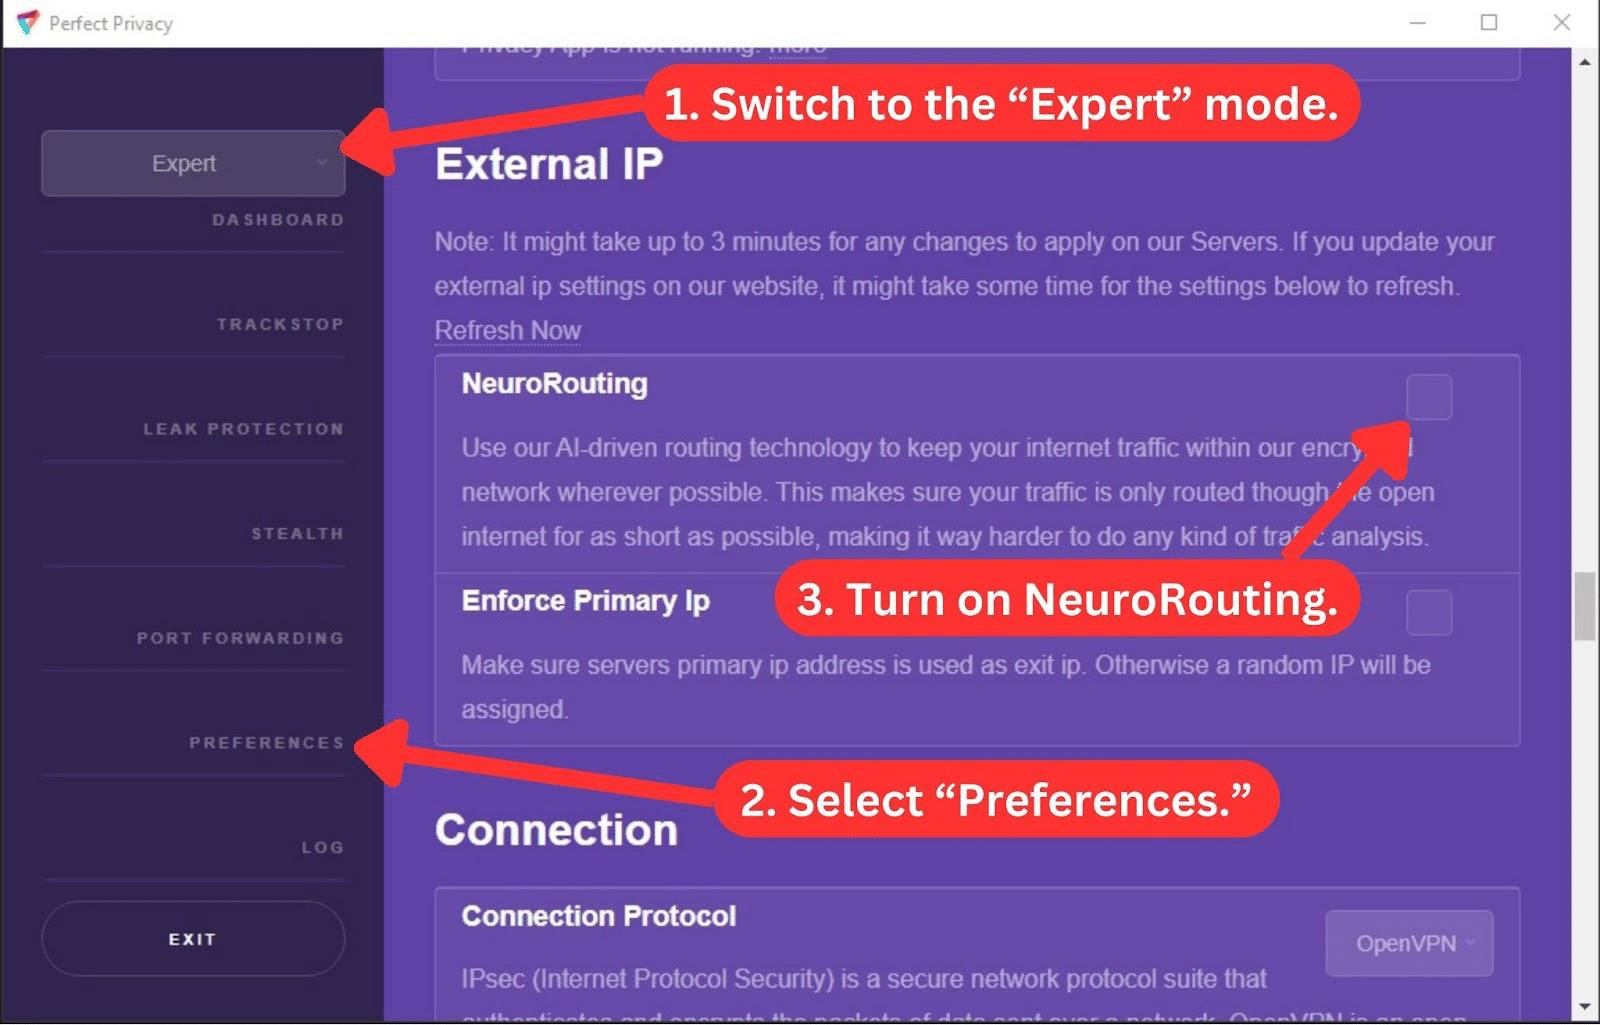 Perfect Privacy Expert mode showing the NeuroRouting feature